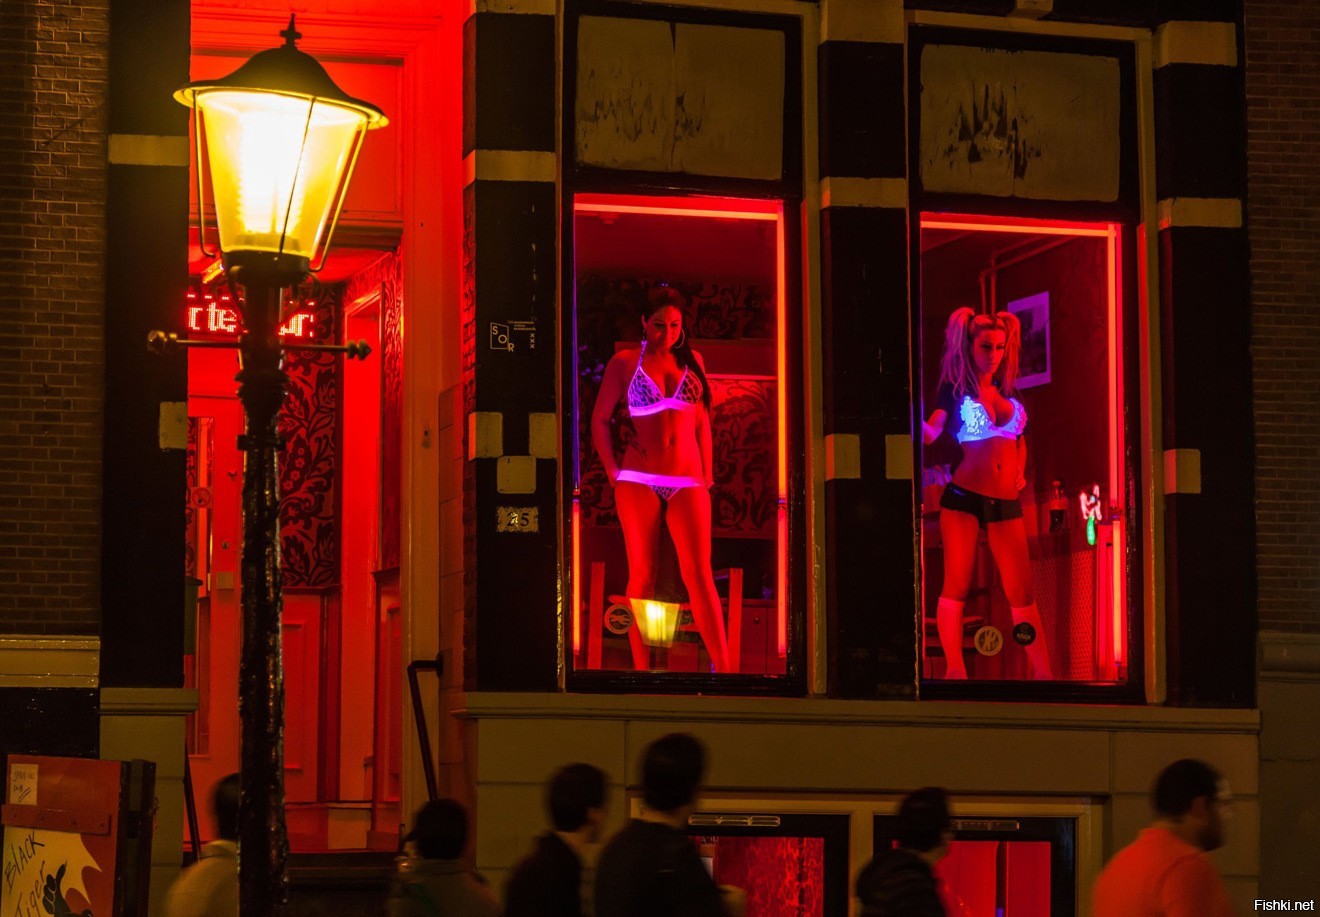 Sex workers say Brussels prostitution ban drives them underground